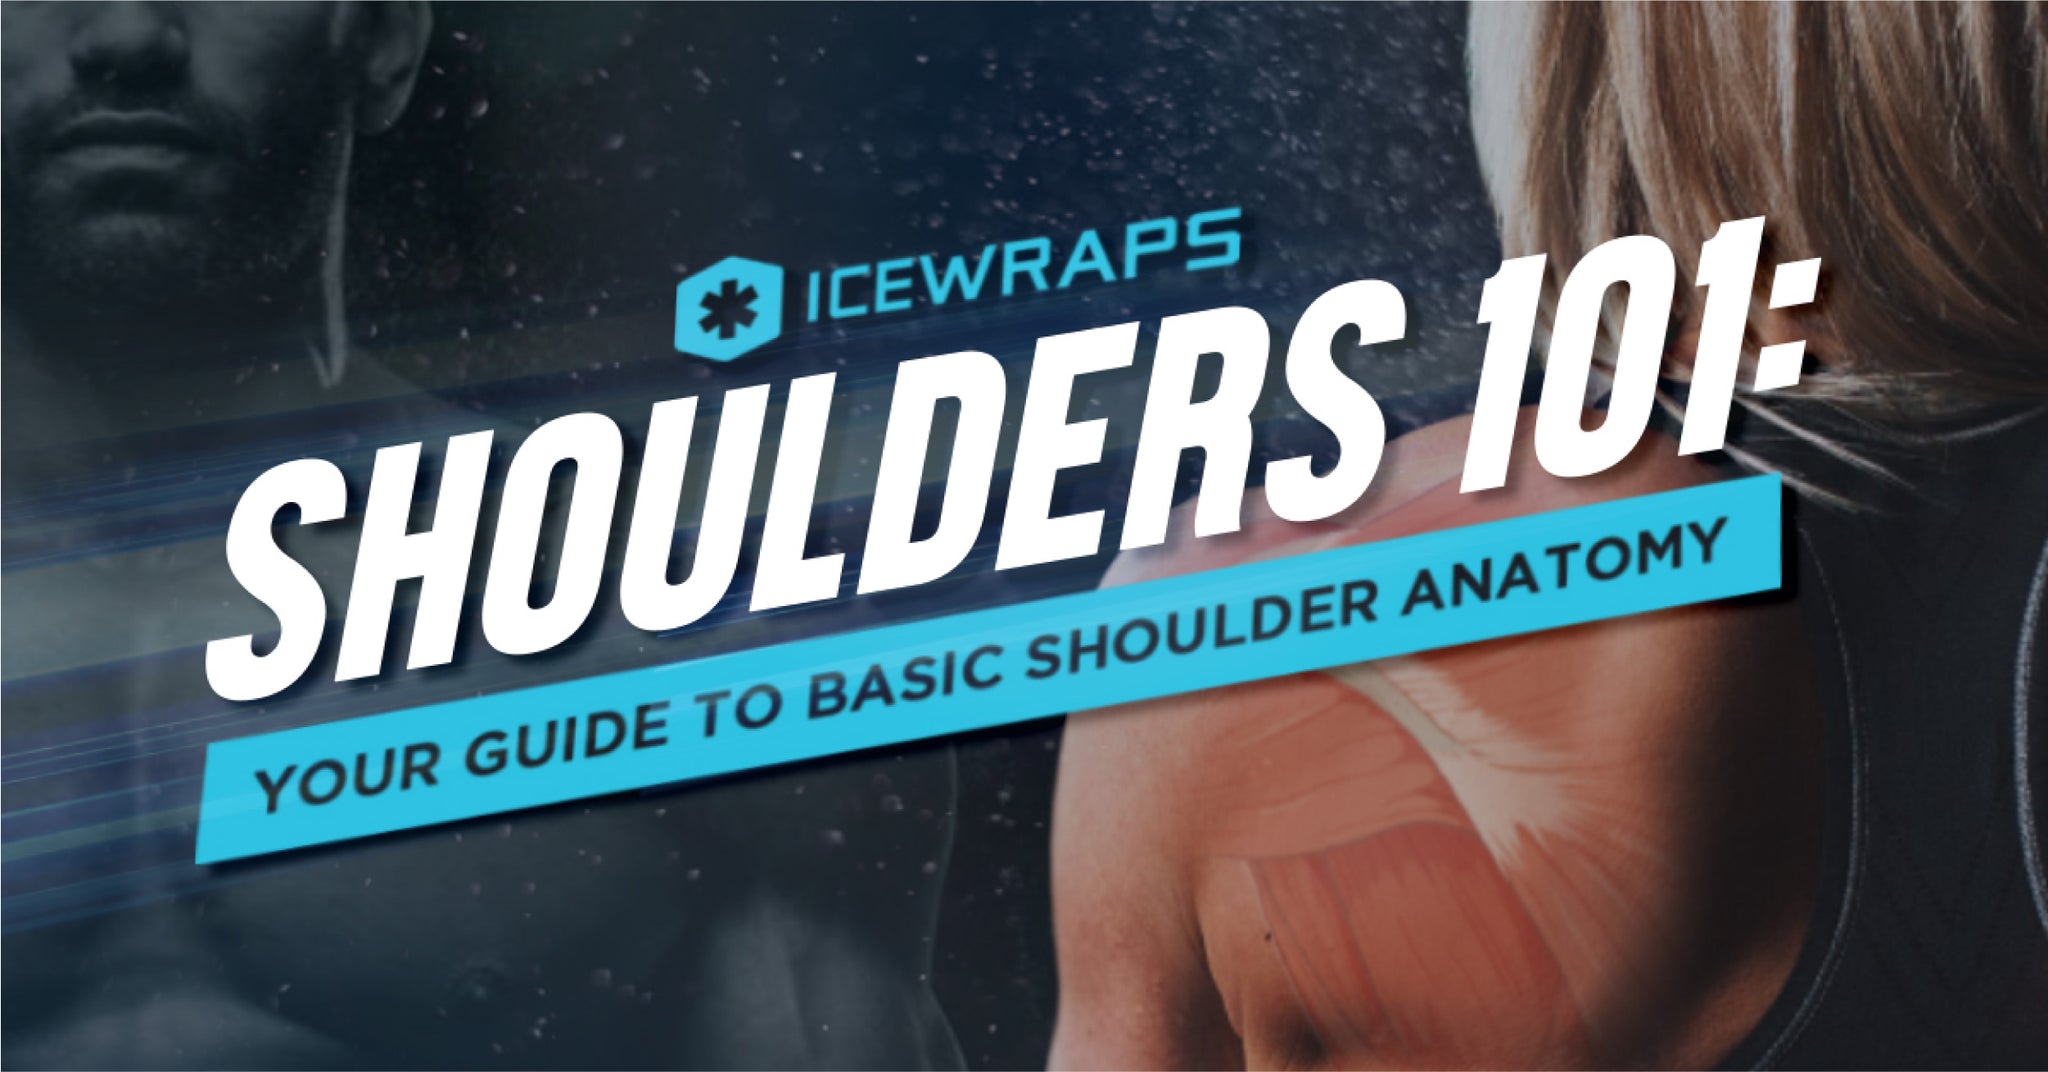 Shoulders 101: Your Guide to Basic Shoulder Anatomy - IceWraps